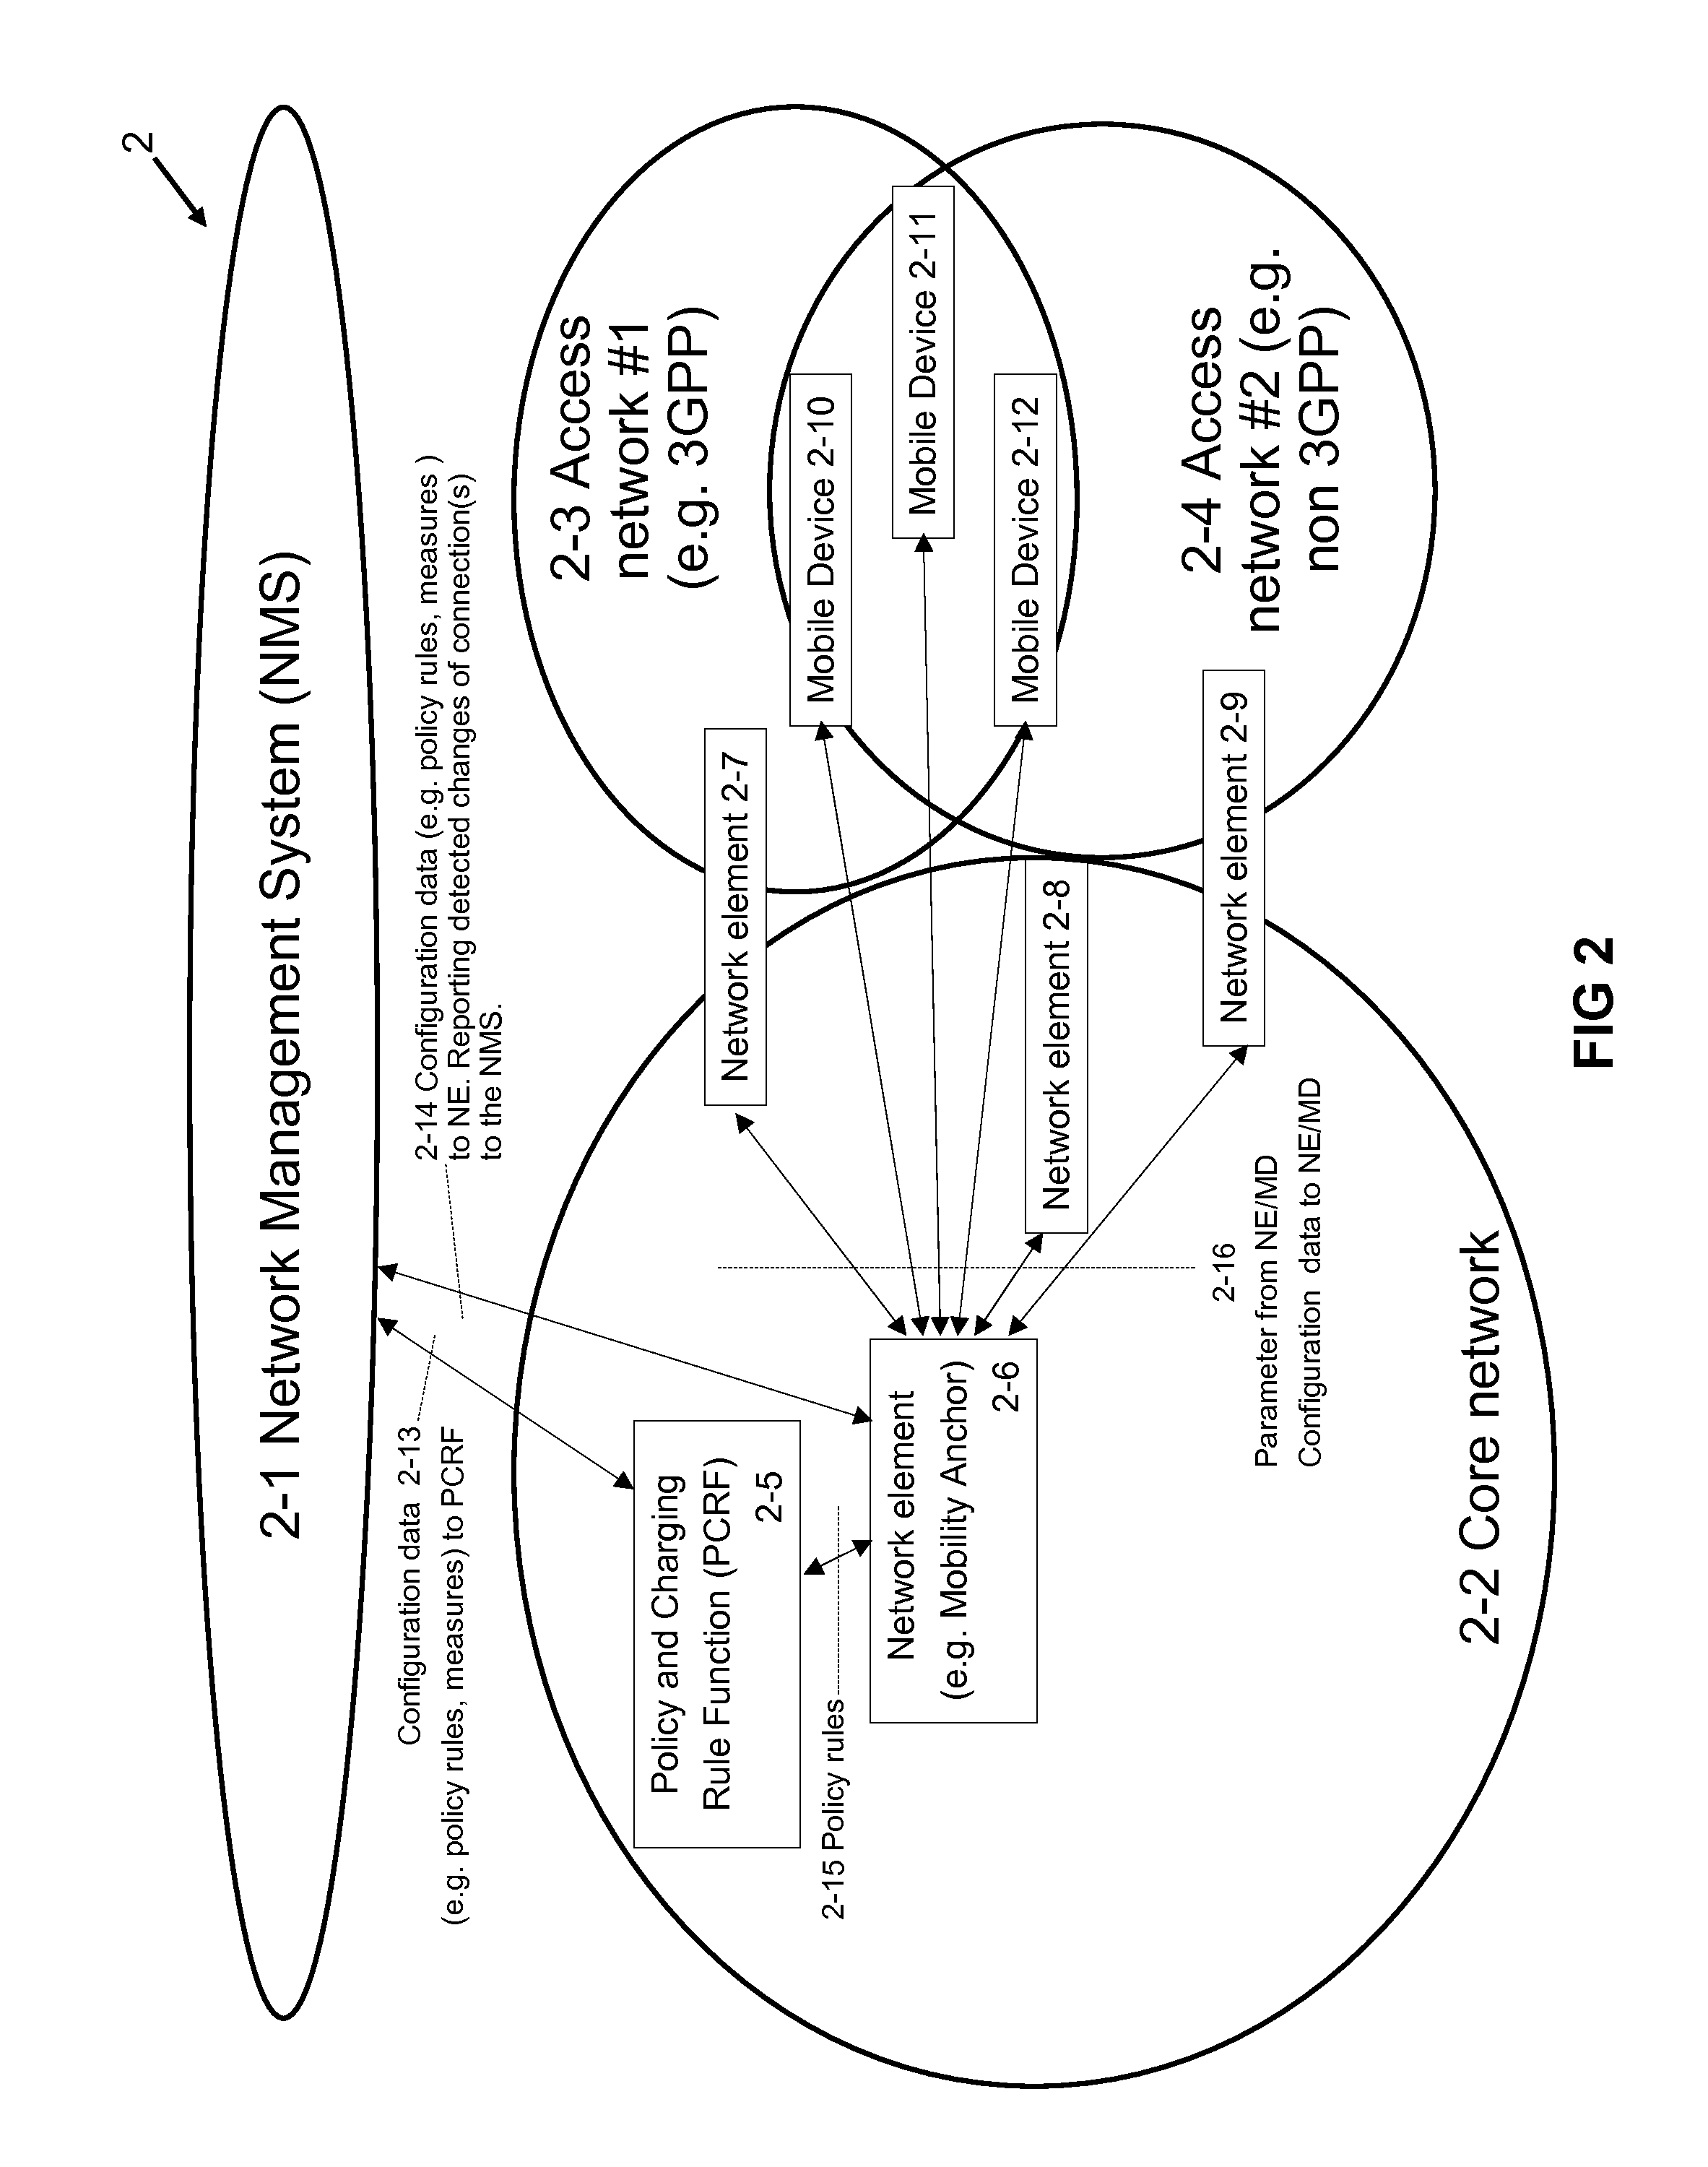 Method, apparatus and related computer program for detecting changes to a network connection